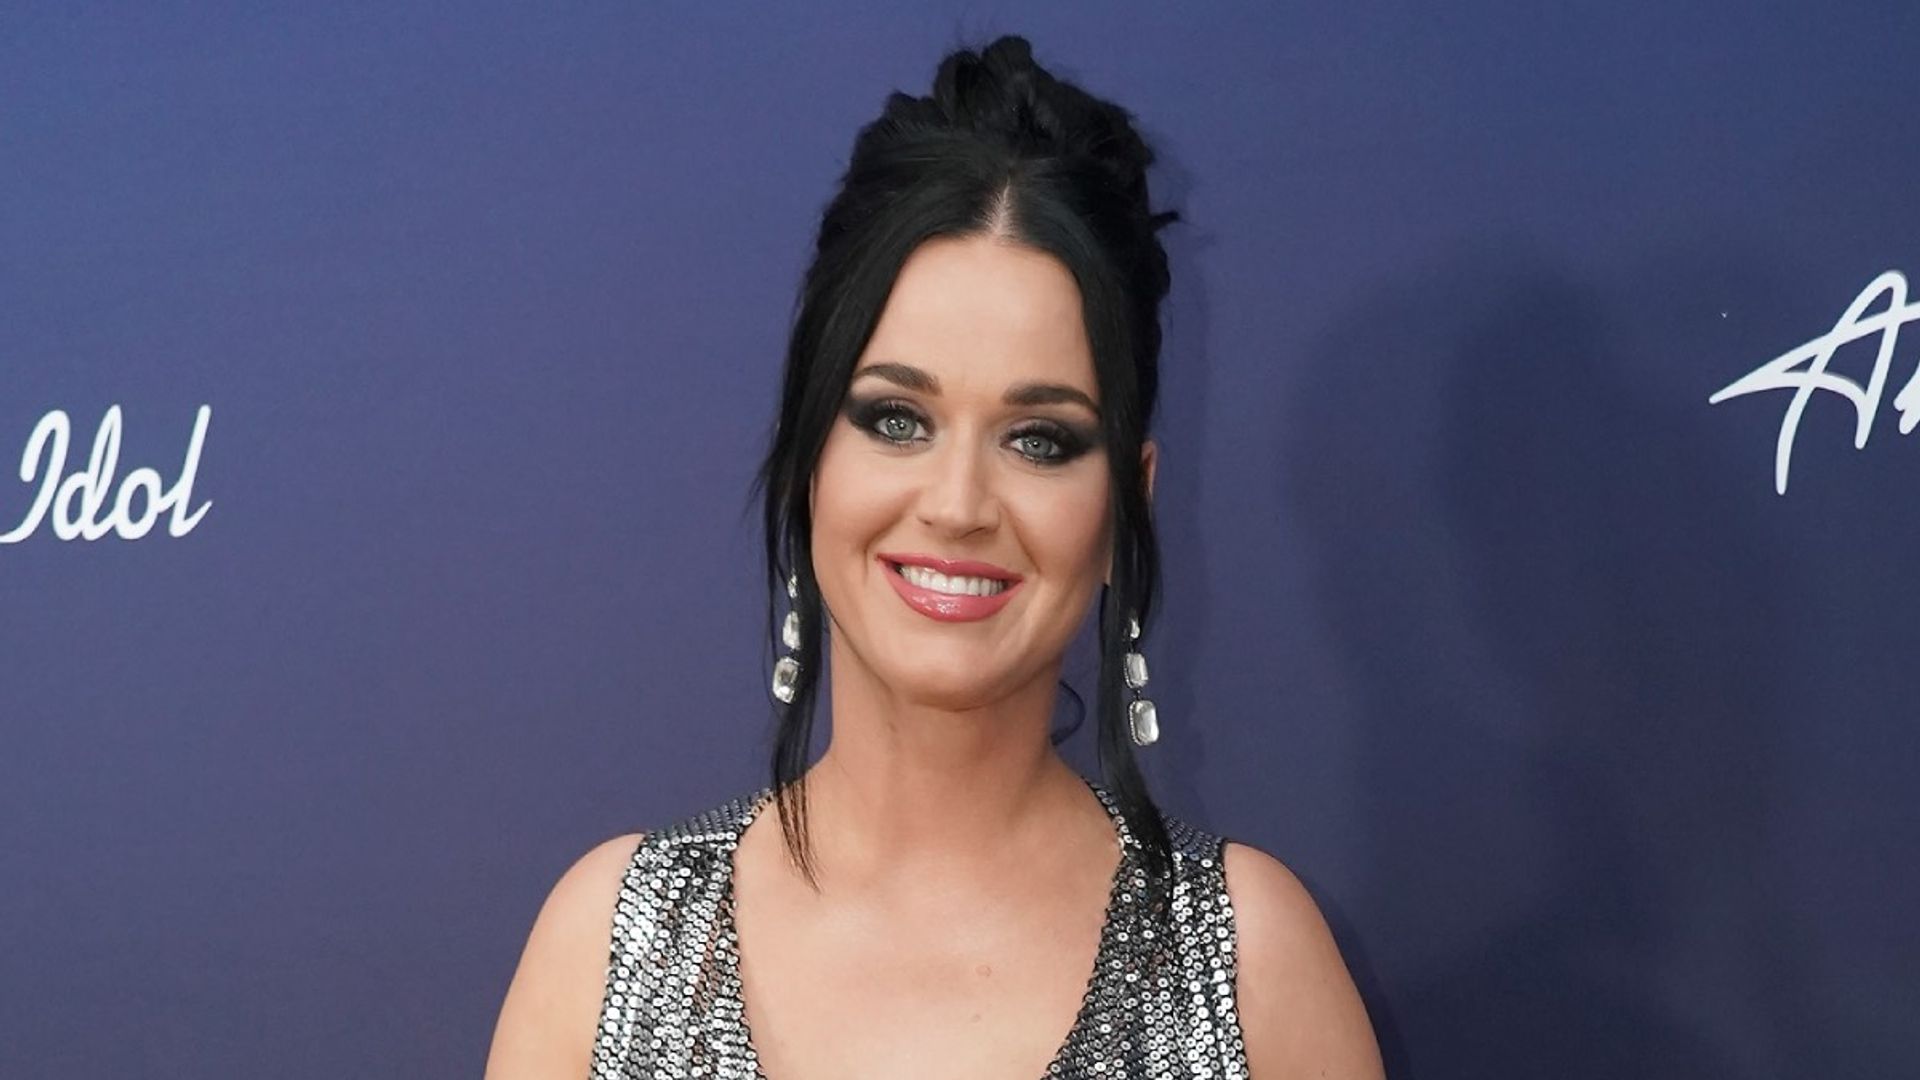 Katy Perry dazzles fans with figure-hugging sequin gown amid surprising ...